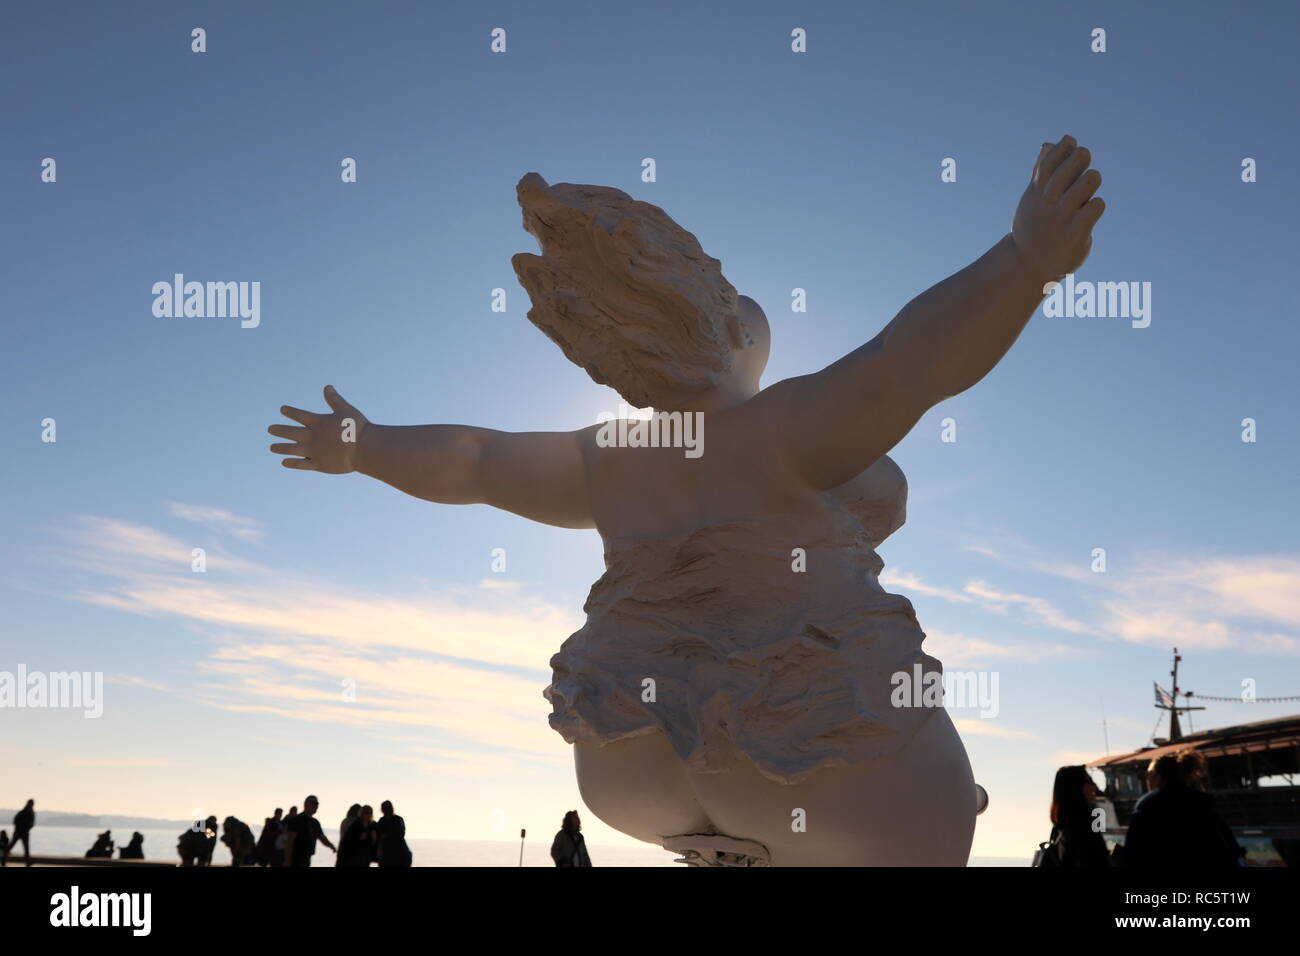 Statue by the Chinese artist  Xu Xongfei exhibited  in Thessaloniki, Greece, between December 17 and December 24, 2018. Stock Photo